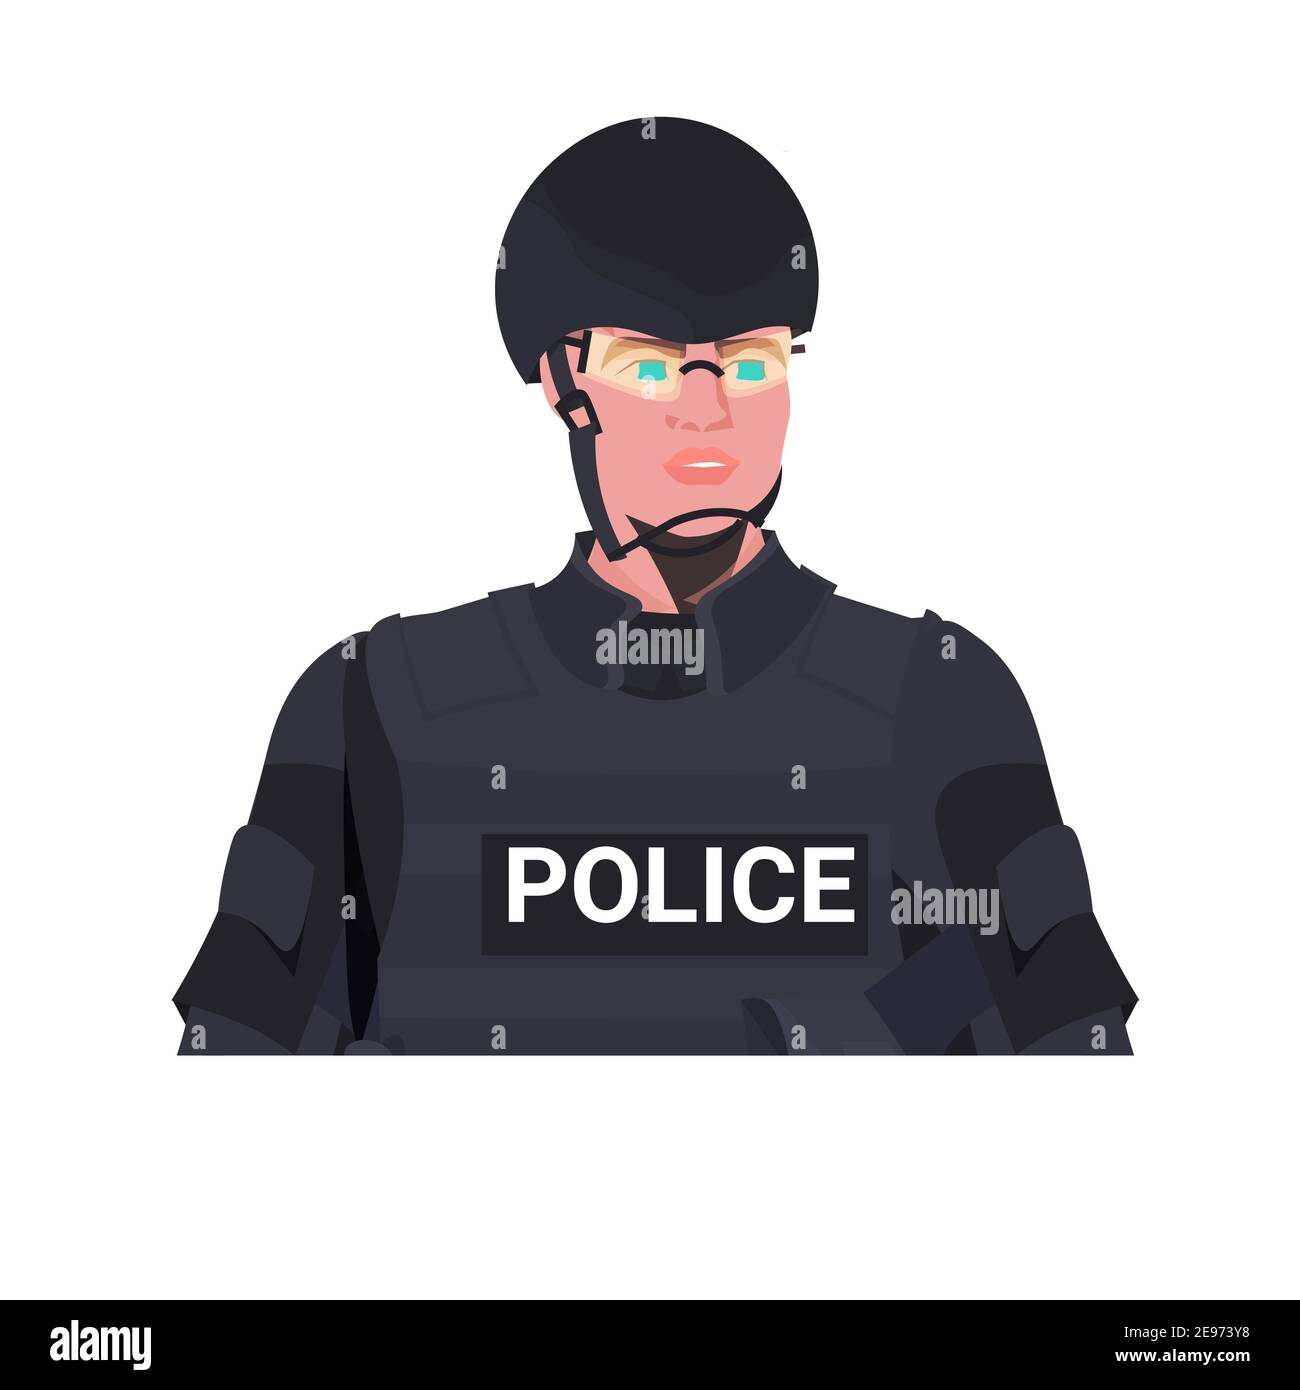 https://c8.alamy.com/comp/2E973Y8/policeman-in-full-tactical-gear-riot-police-officer-holding-baton-protesters-and-demonstration-riots-mass-control-concept-portrait-vector-illustration-2E973Y8.jpg